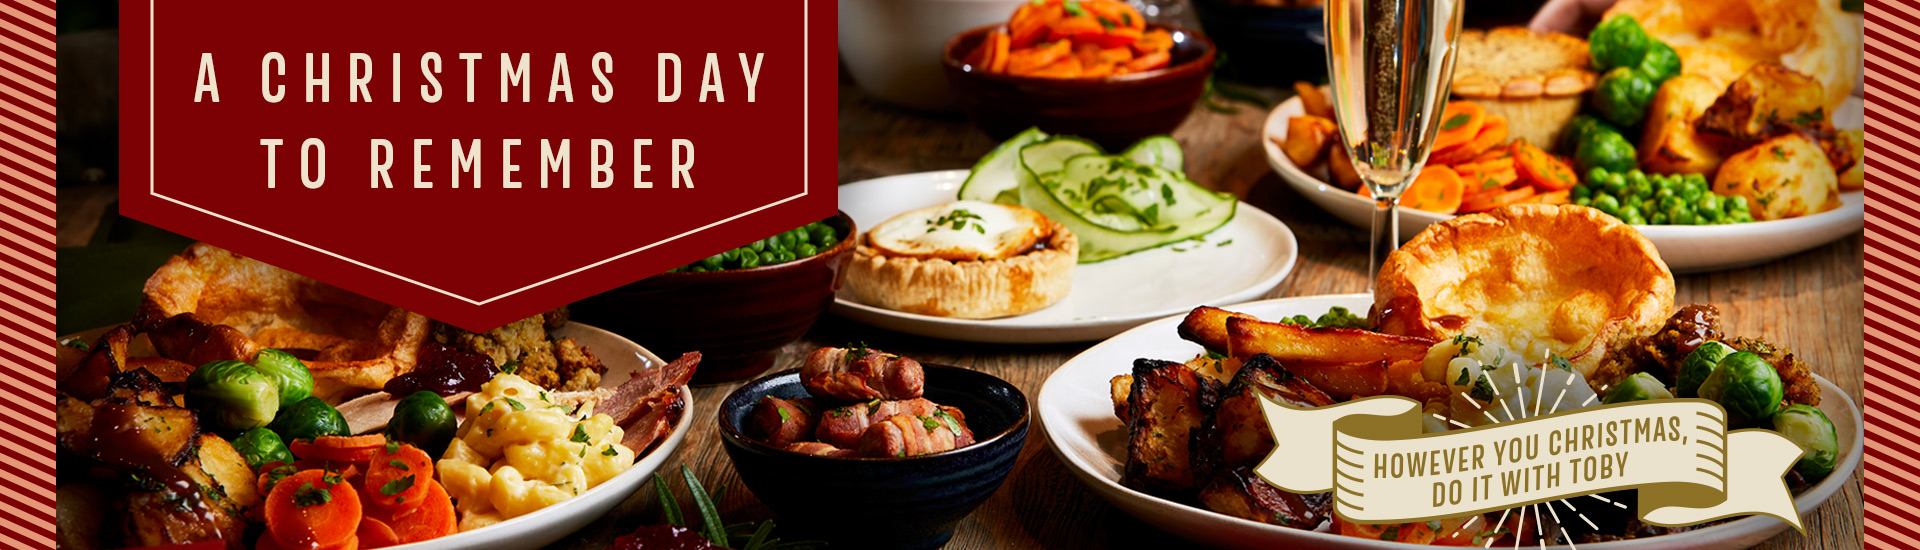 Christmas Day menu at Toby Carvery Old Forge